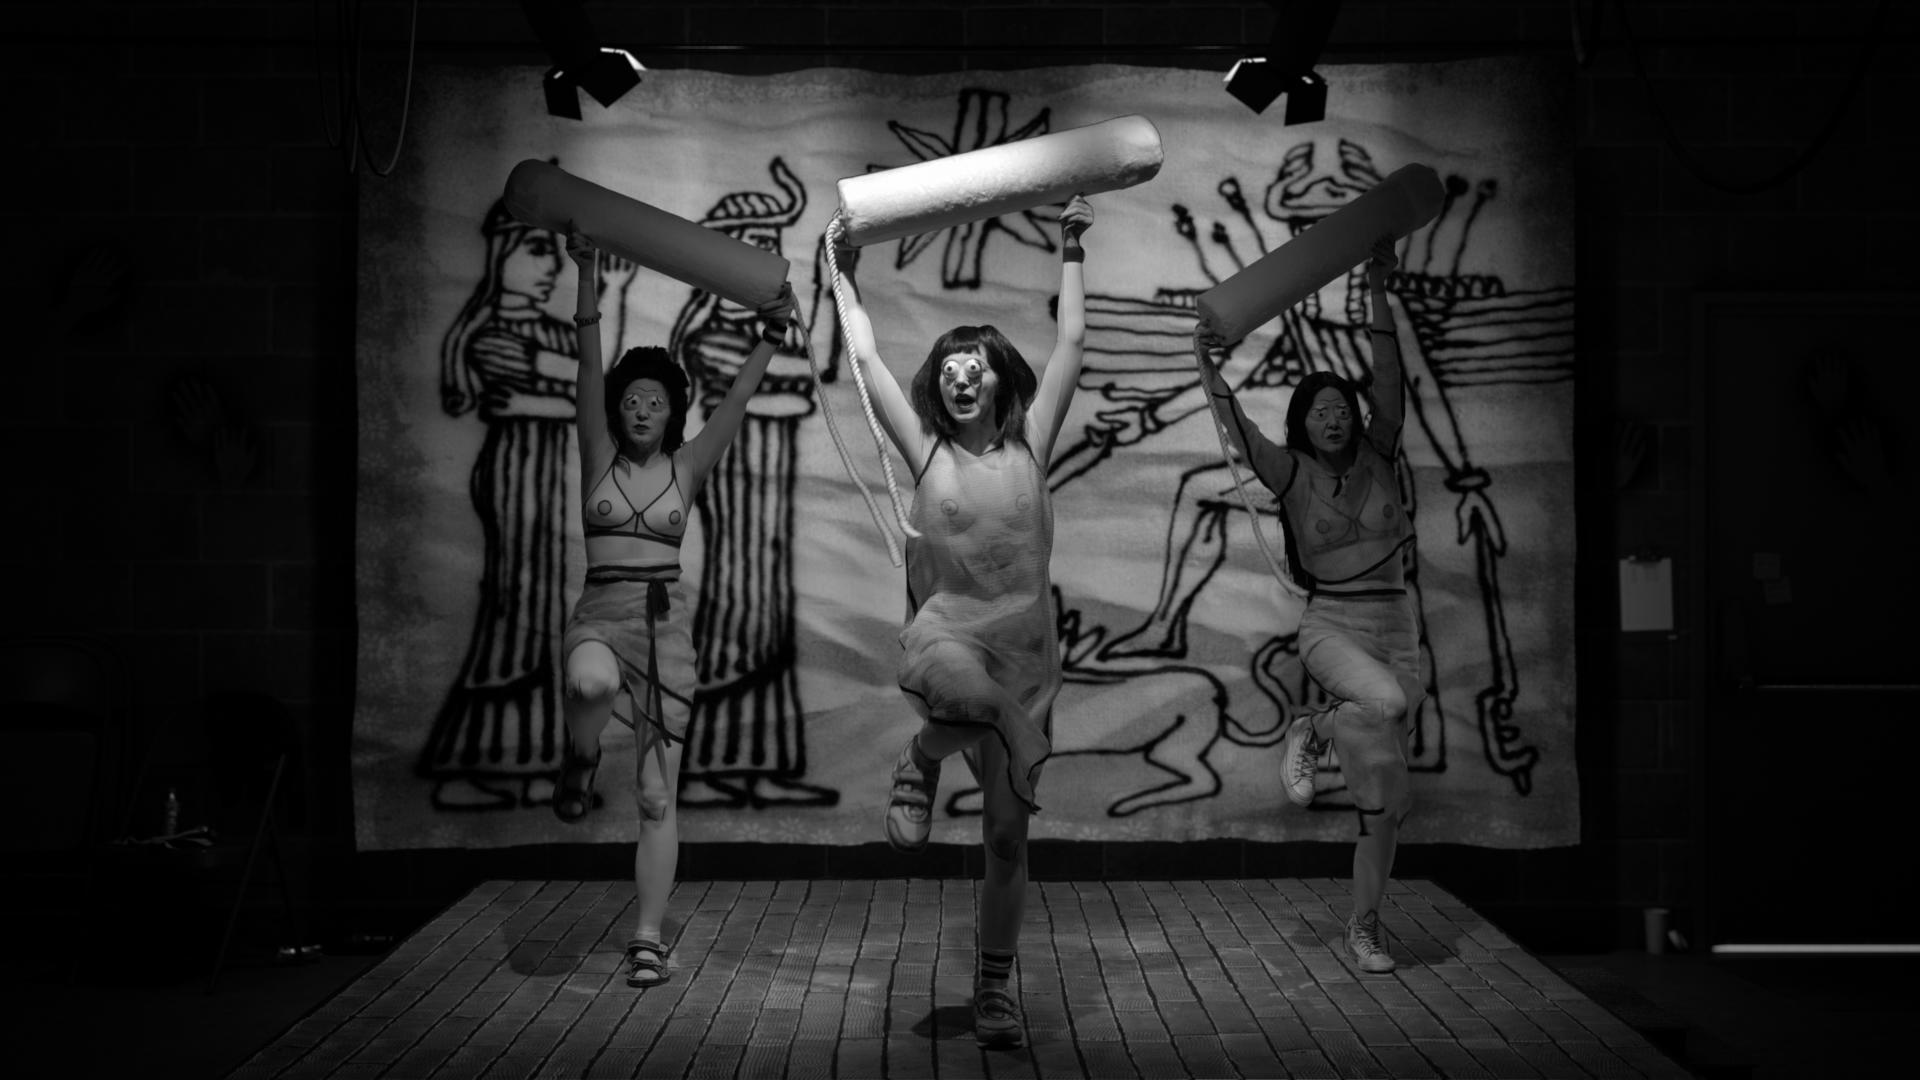 Europa dancing with two other performers in black and white.